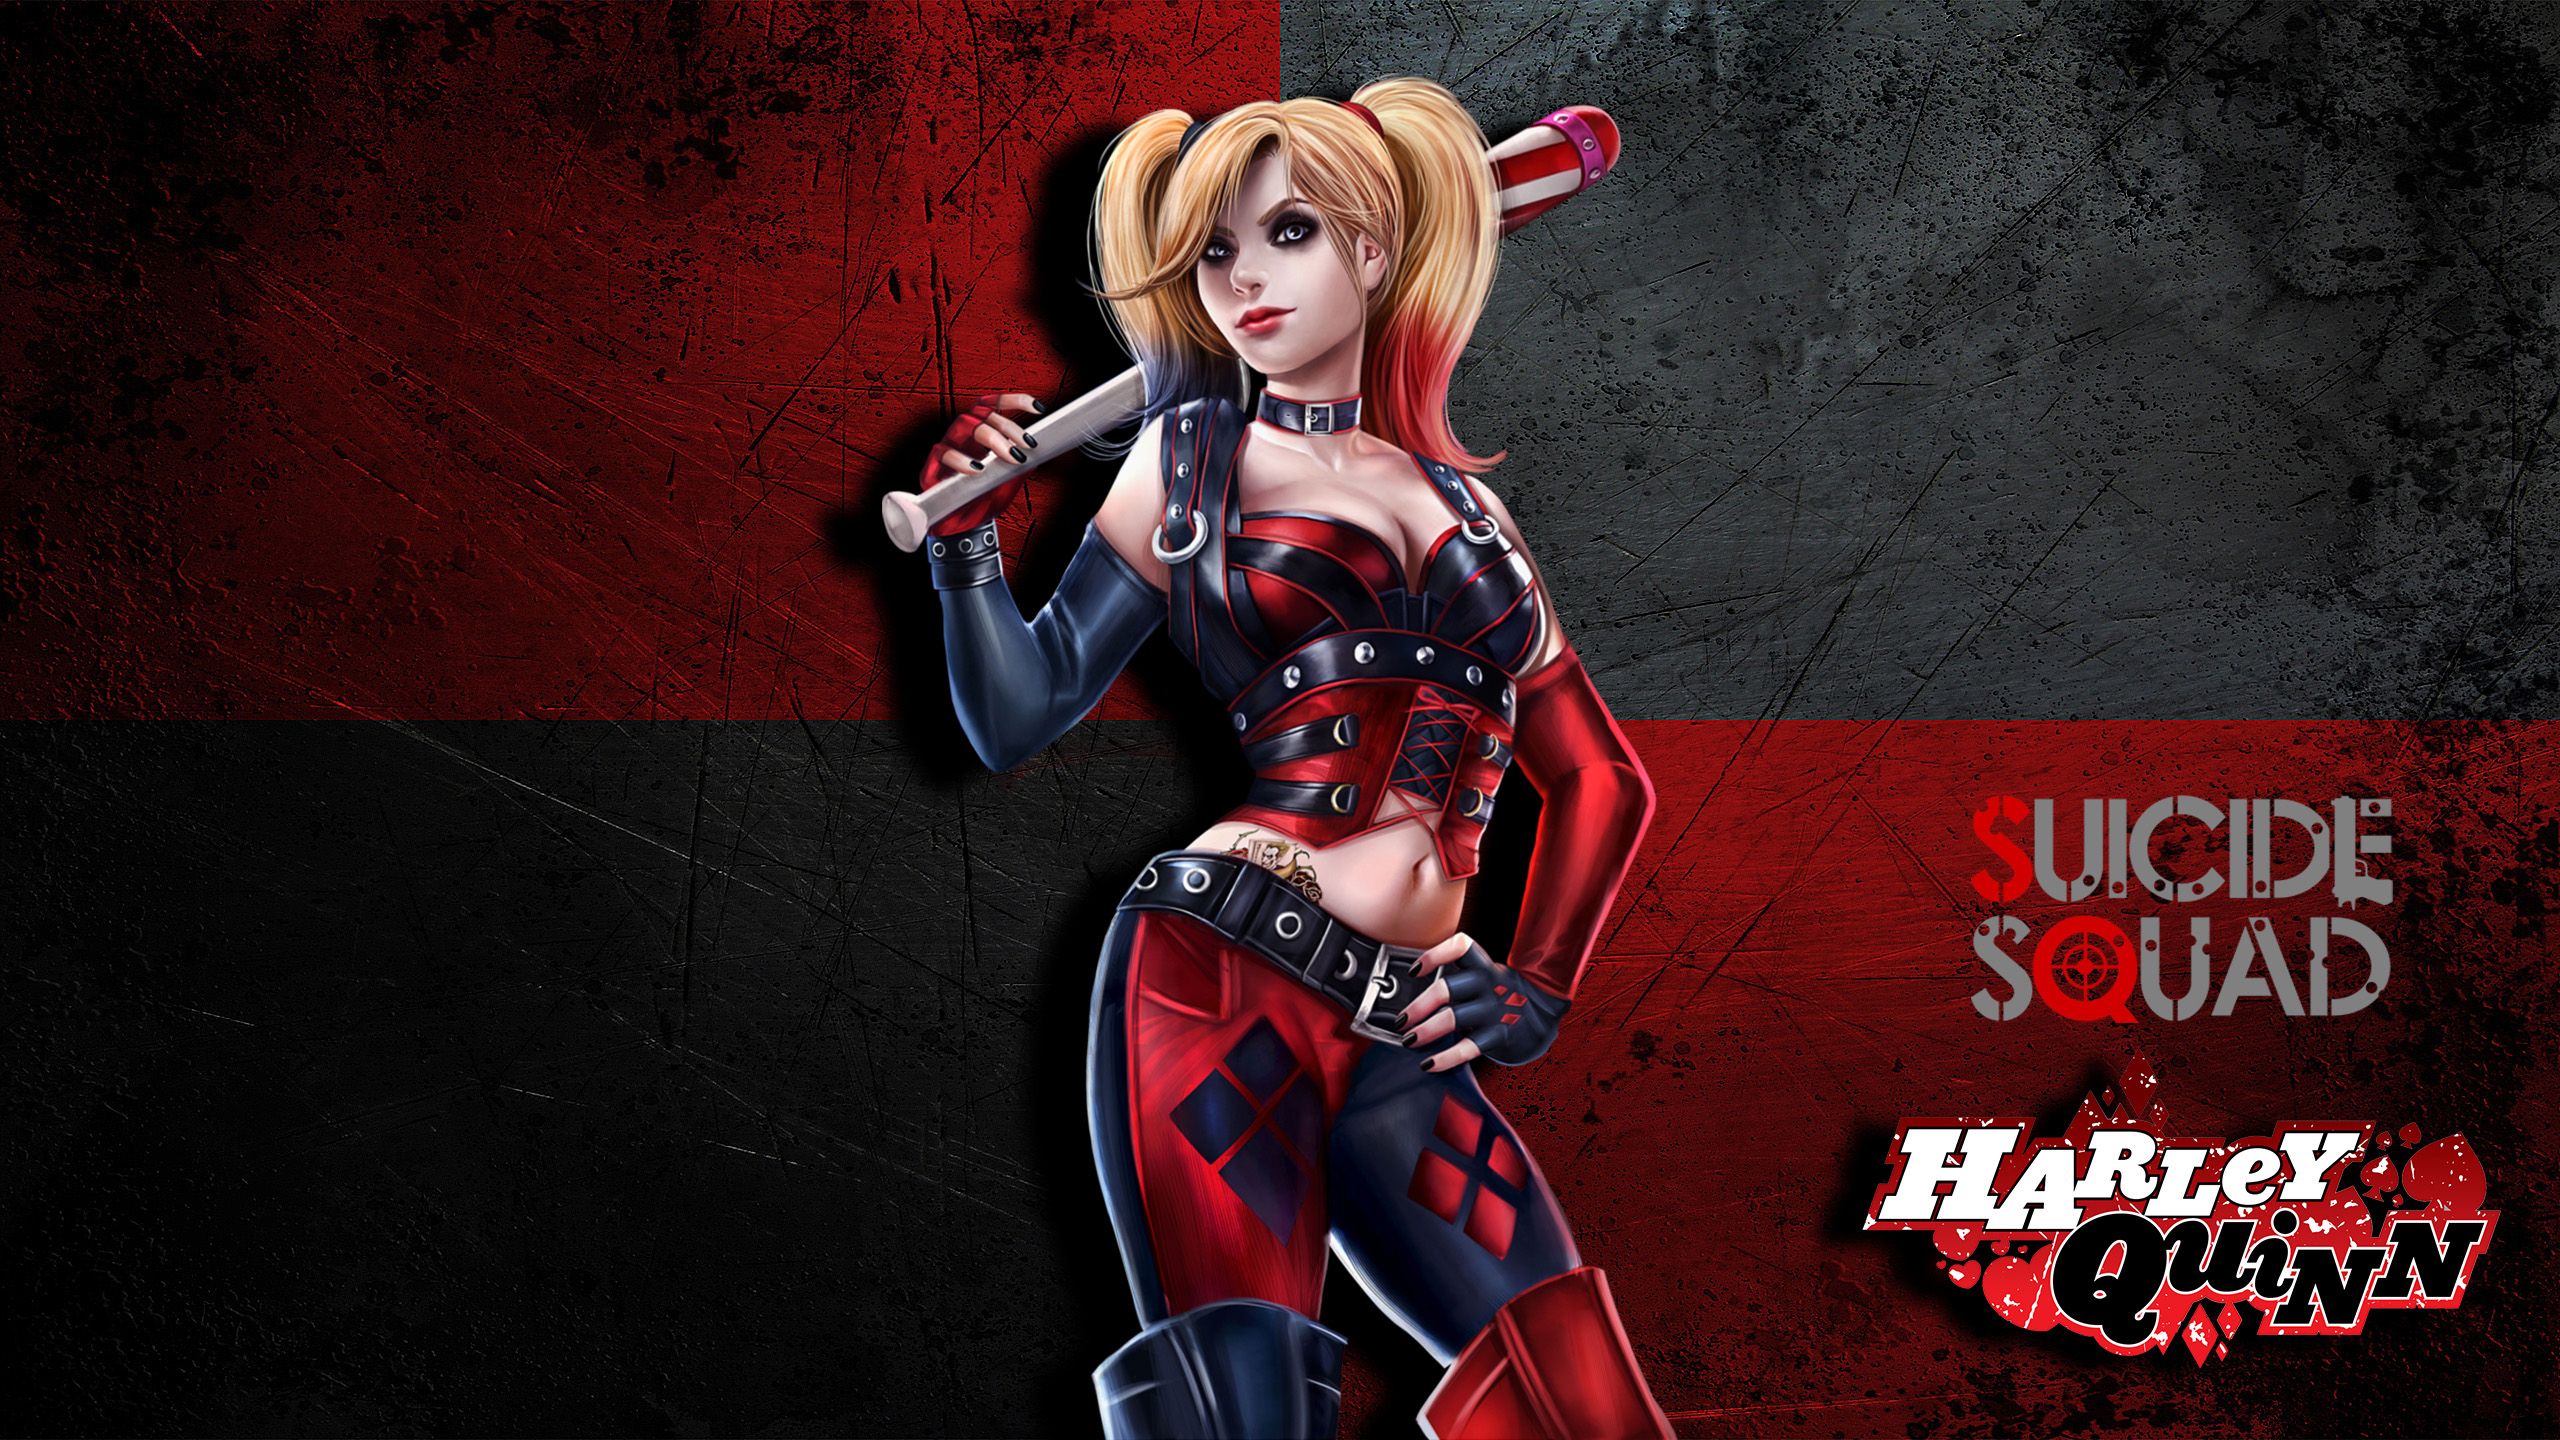  Squad 2016 Movie wallpaper Harley Quinn HD Wallpapers for 2560x1440